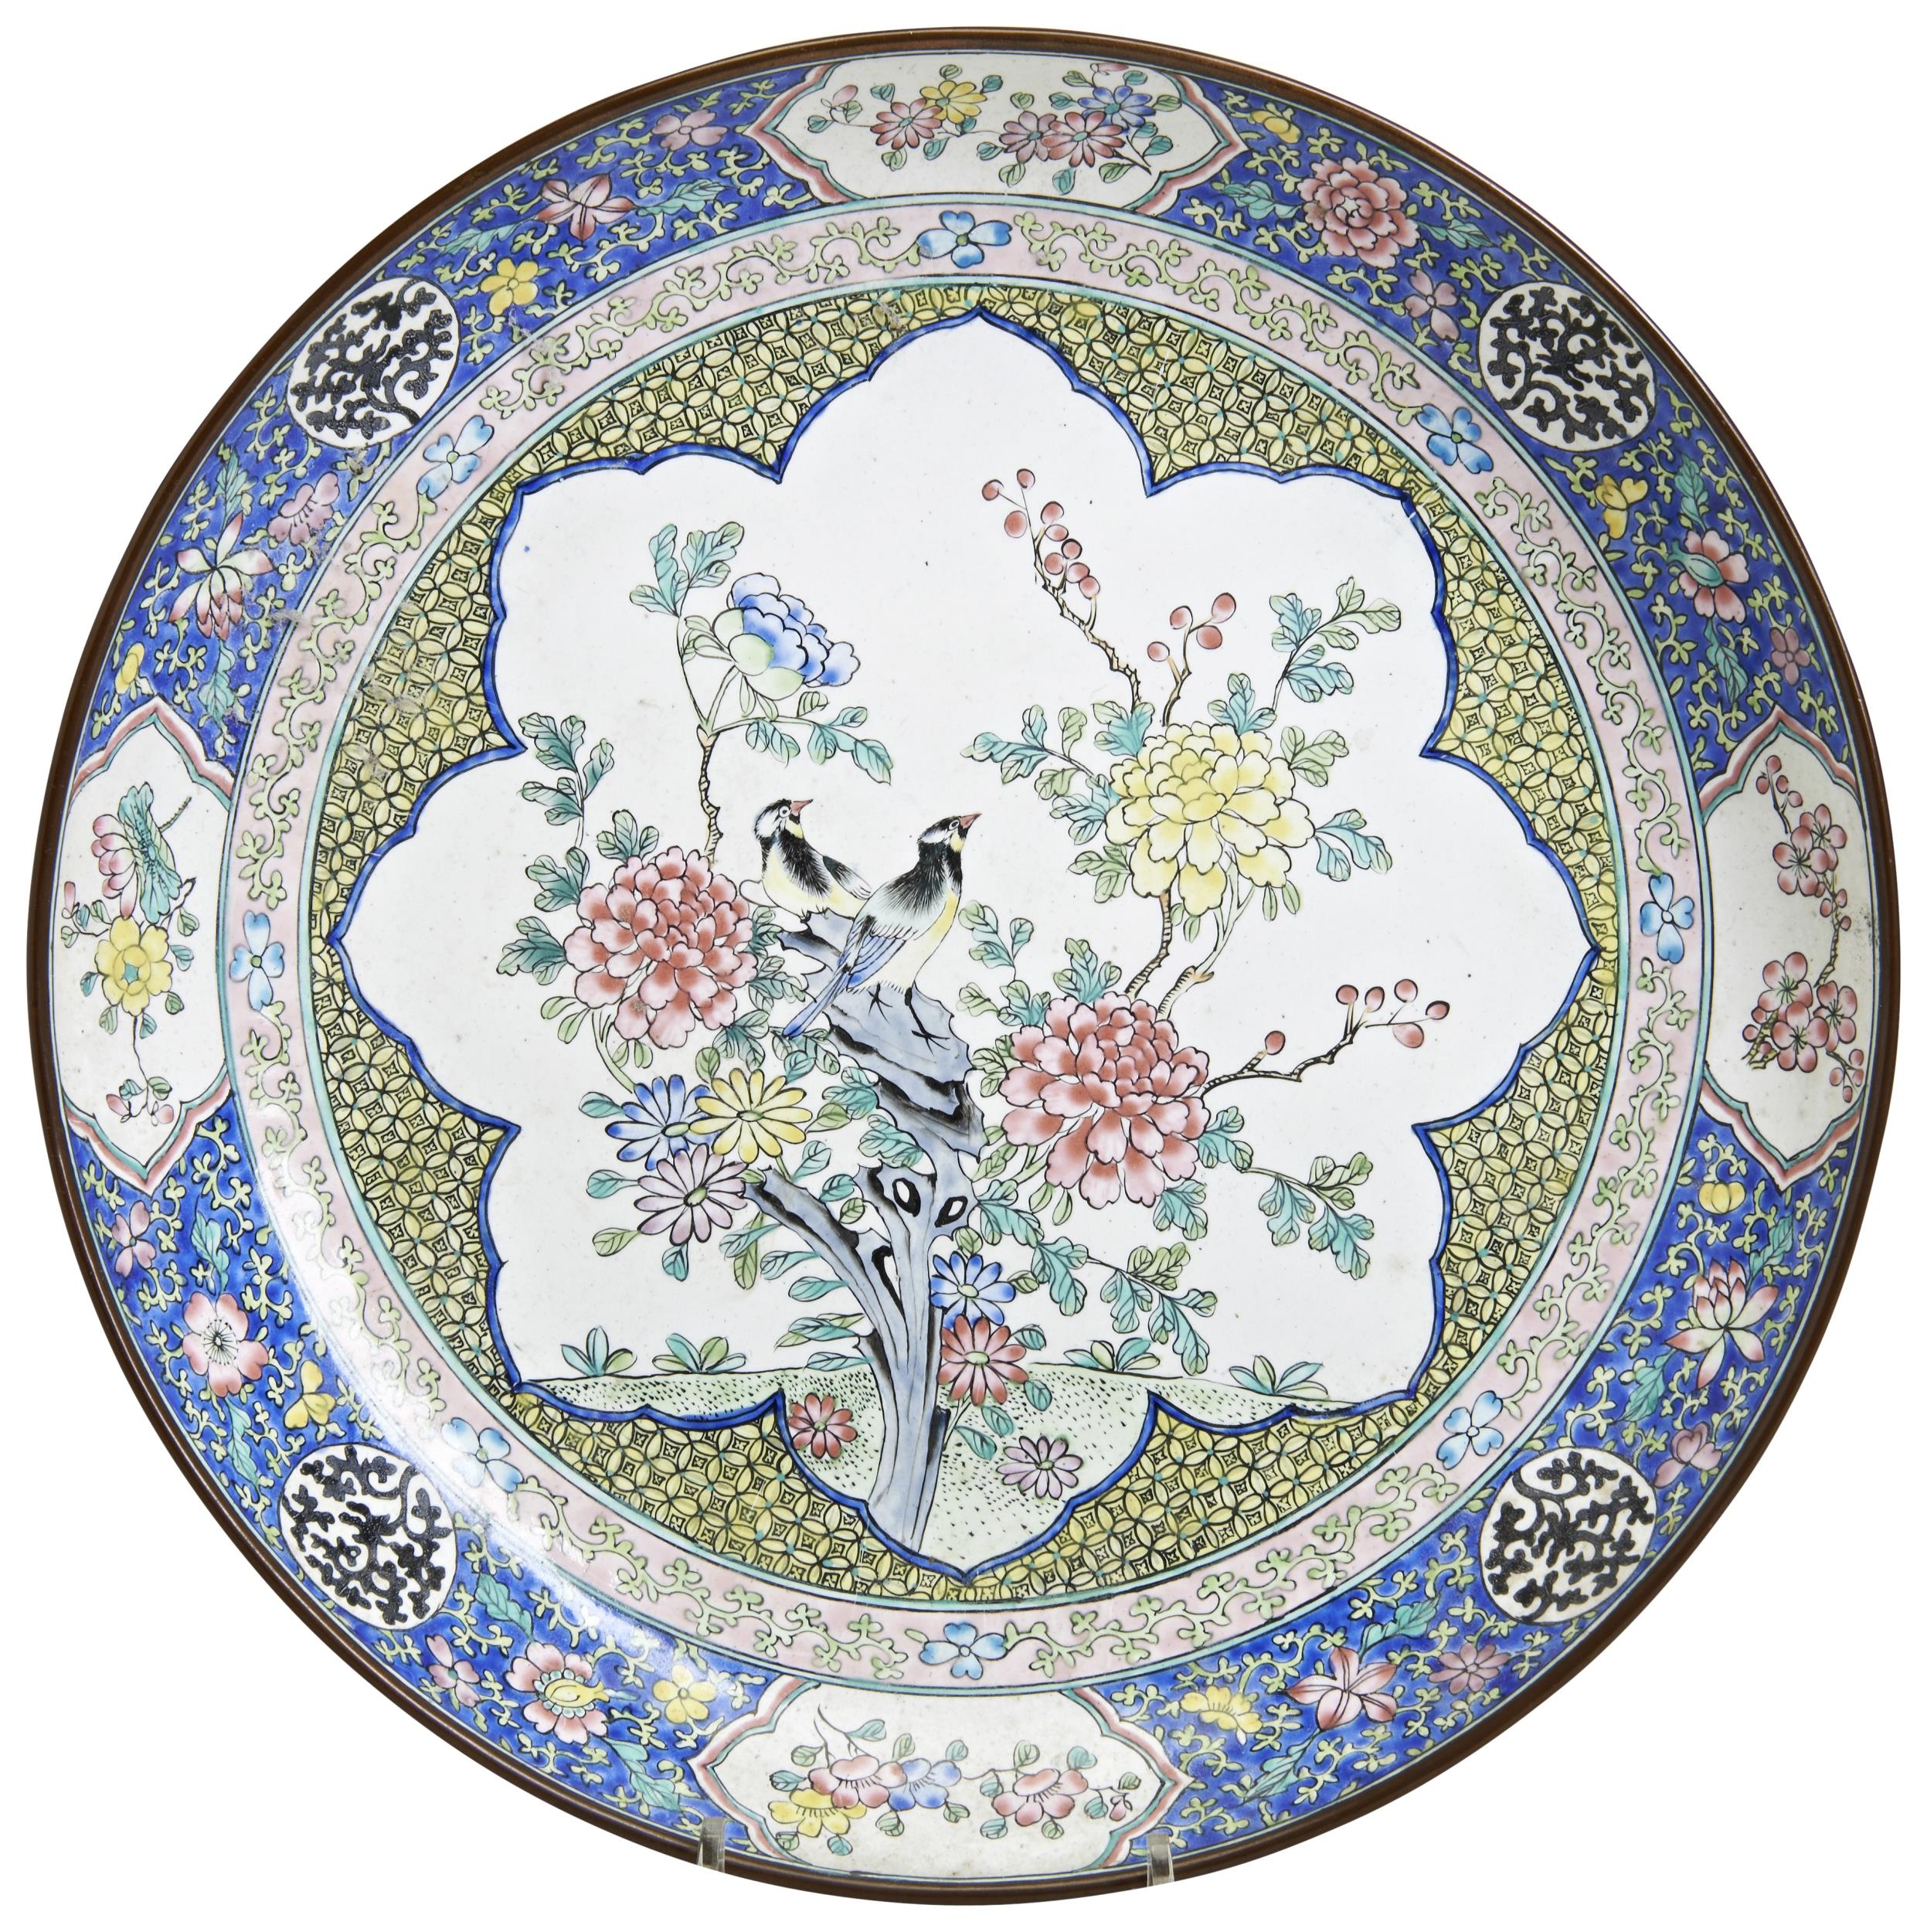 A FAMILLE ROSE CANTON ENAMEL DISH QINALONG PERIOD (1736-1795) painted with birds perched on rocks